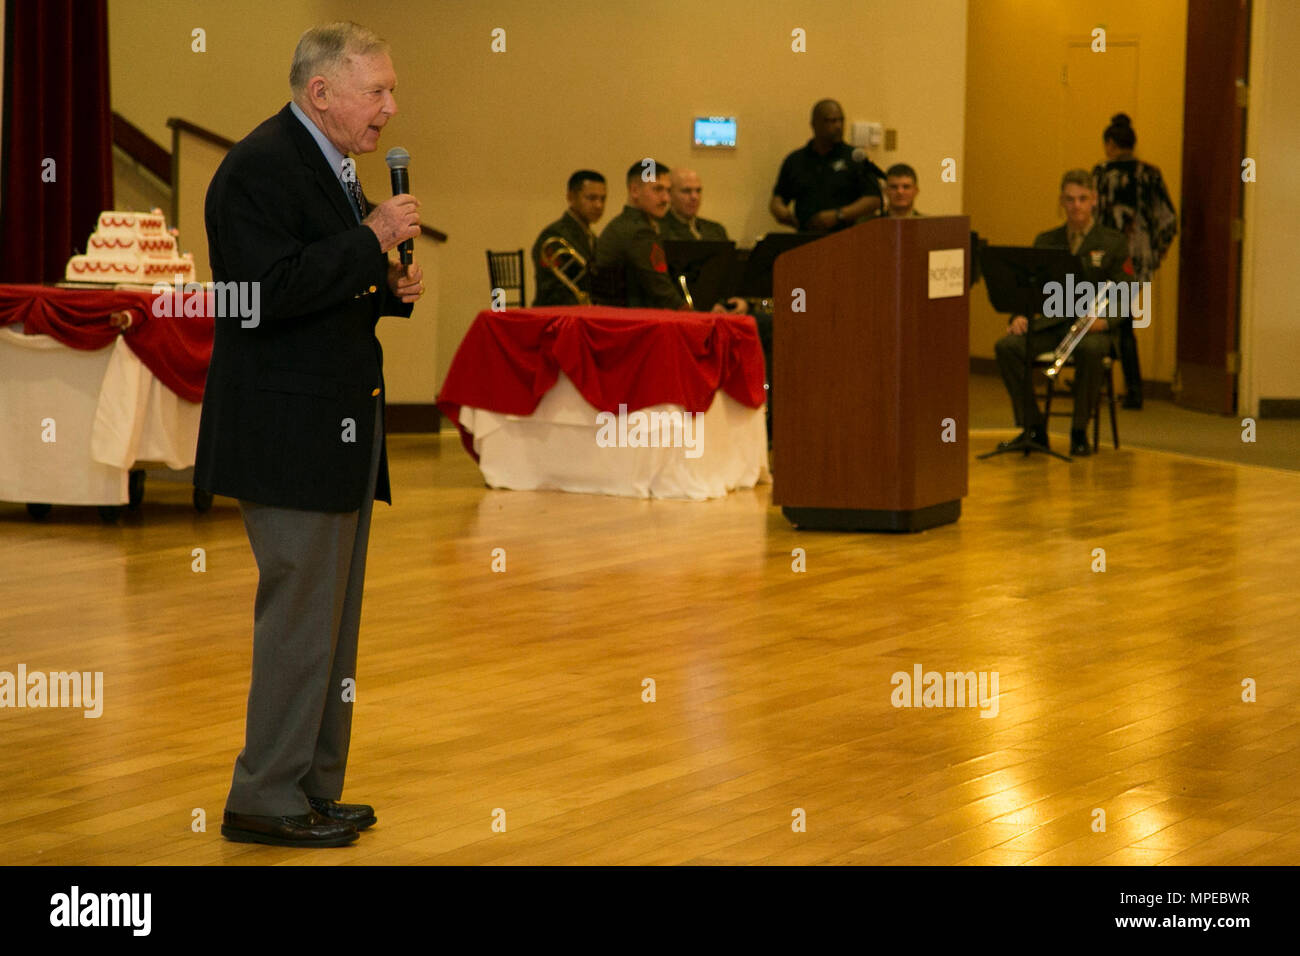 U.S. Marine Corps Col. Richard Rothwell (Retired), makes his opening remarks to the guests of the 1st annual Camp Pendleton Historical Society Awards dinner at the Pacific Views Event Center on Camp Pendleton, Calif., Feb. 11, 2017. (US Marine Corps photo by Cpl. Brian Bekkala) Stock Photo